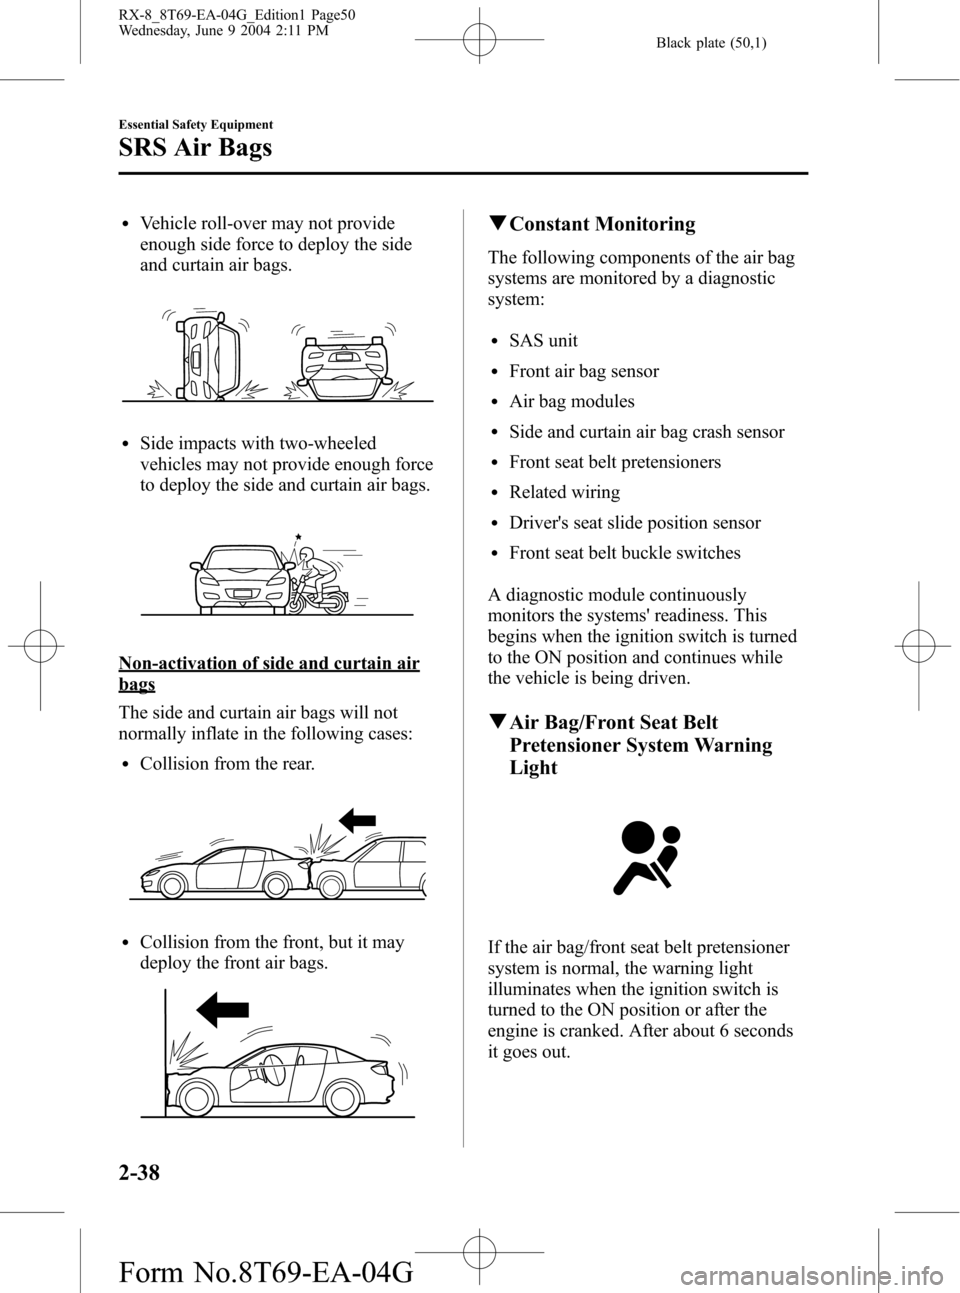 MAZDA MODEL RX 8 2005  Owners Manual (in English) Black plate (50,1)
lVehicle roll-over may not provide
enough side force to deploy the side
and curtain air bags.
lSide impacts with two-wheeled
vehicles may not provide enough force
to deploy the side